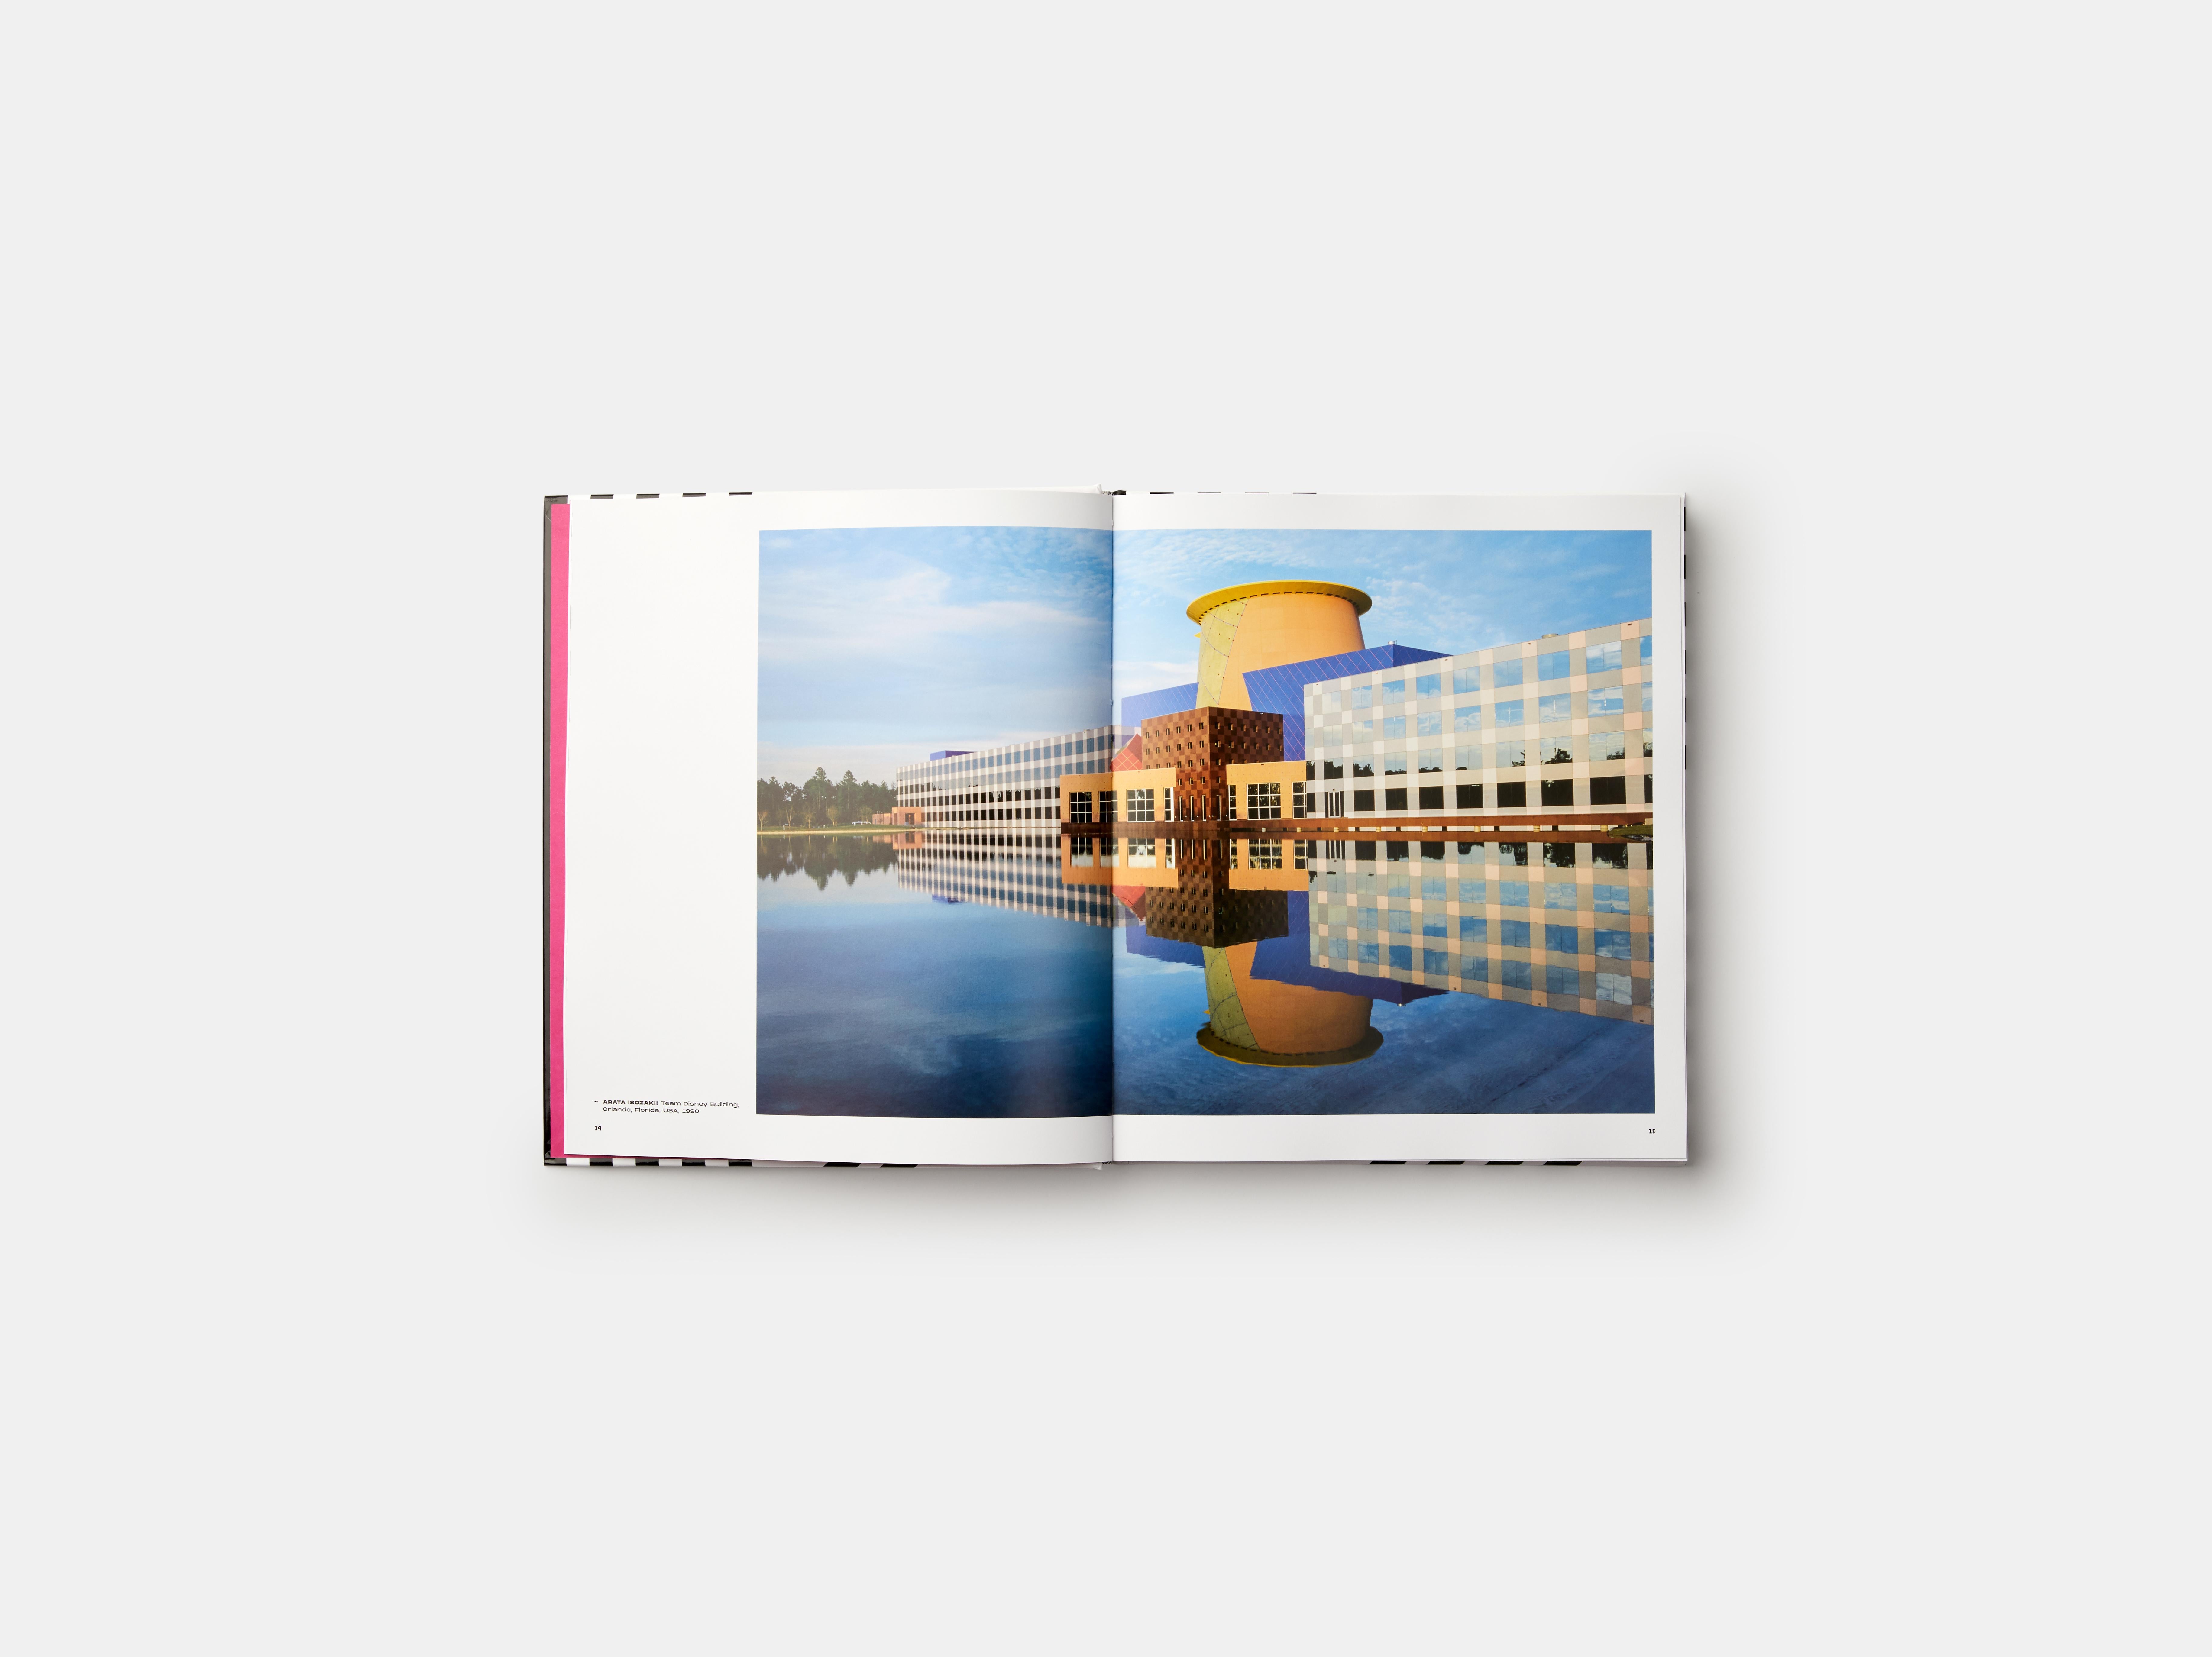 A curated collection of Postmodern architecture in all its glorious array of vivid non-conformity

This unprecedented book takes its subtitle from Postmodernist icon Robert Venturi's spirited response to Mies van der Rohe's dictum that ‘less is